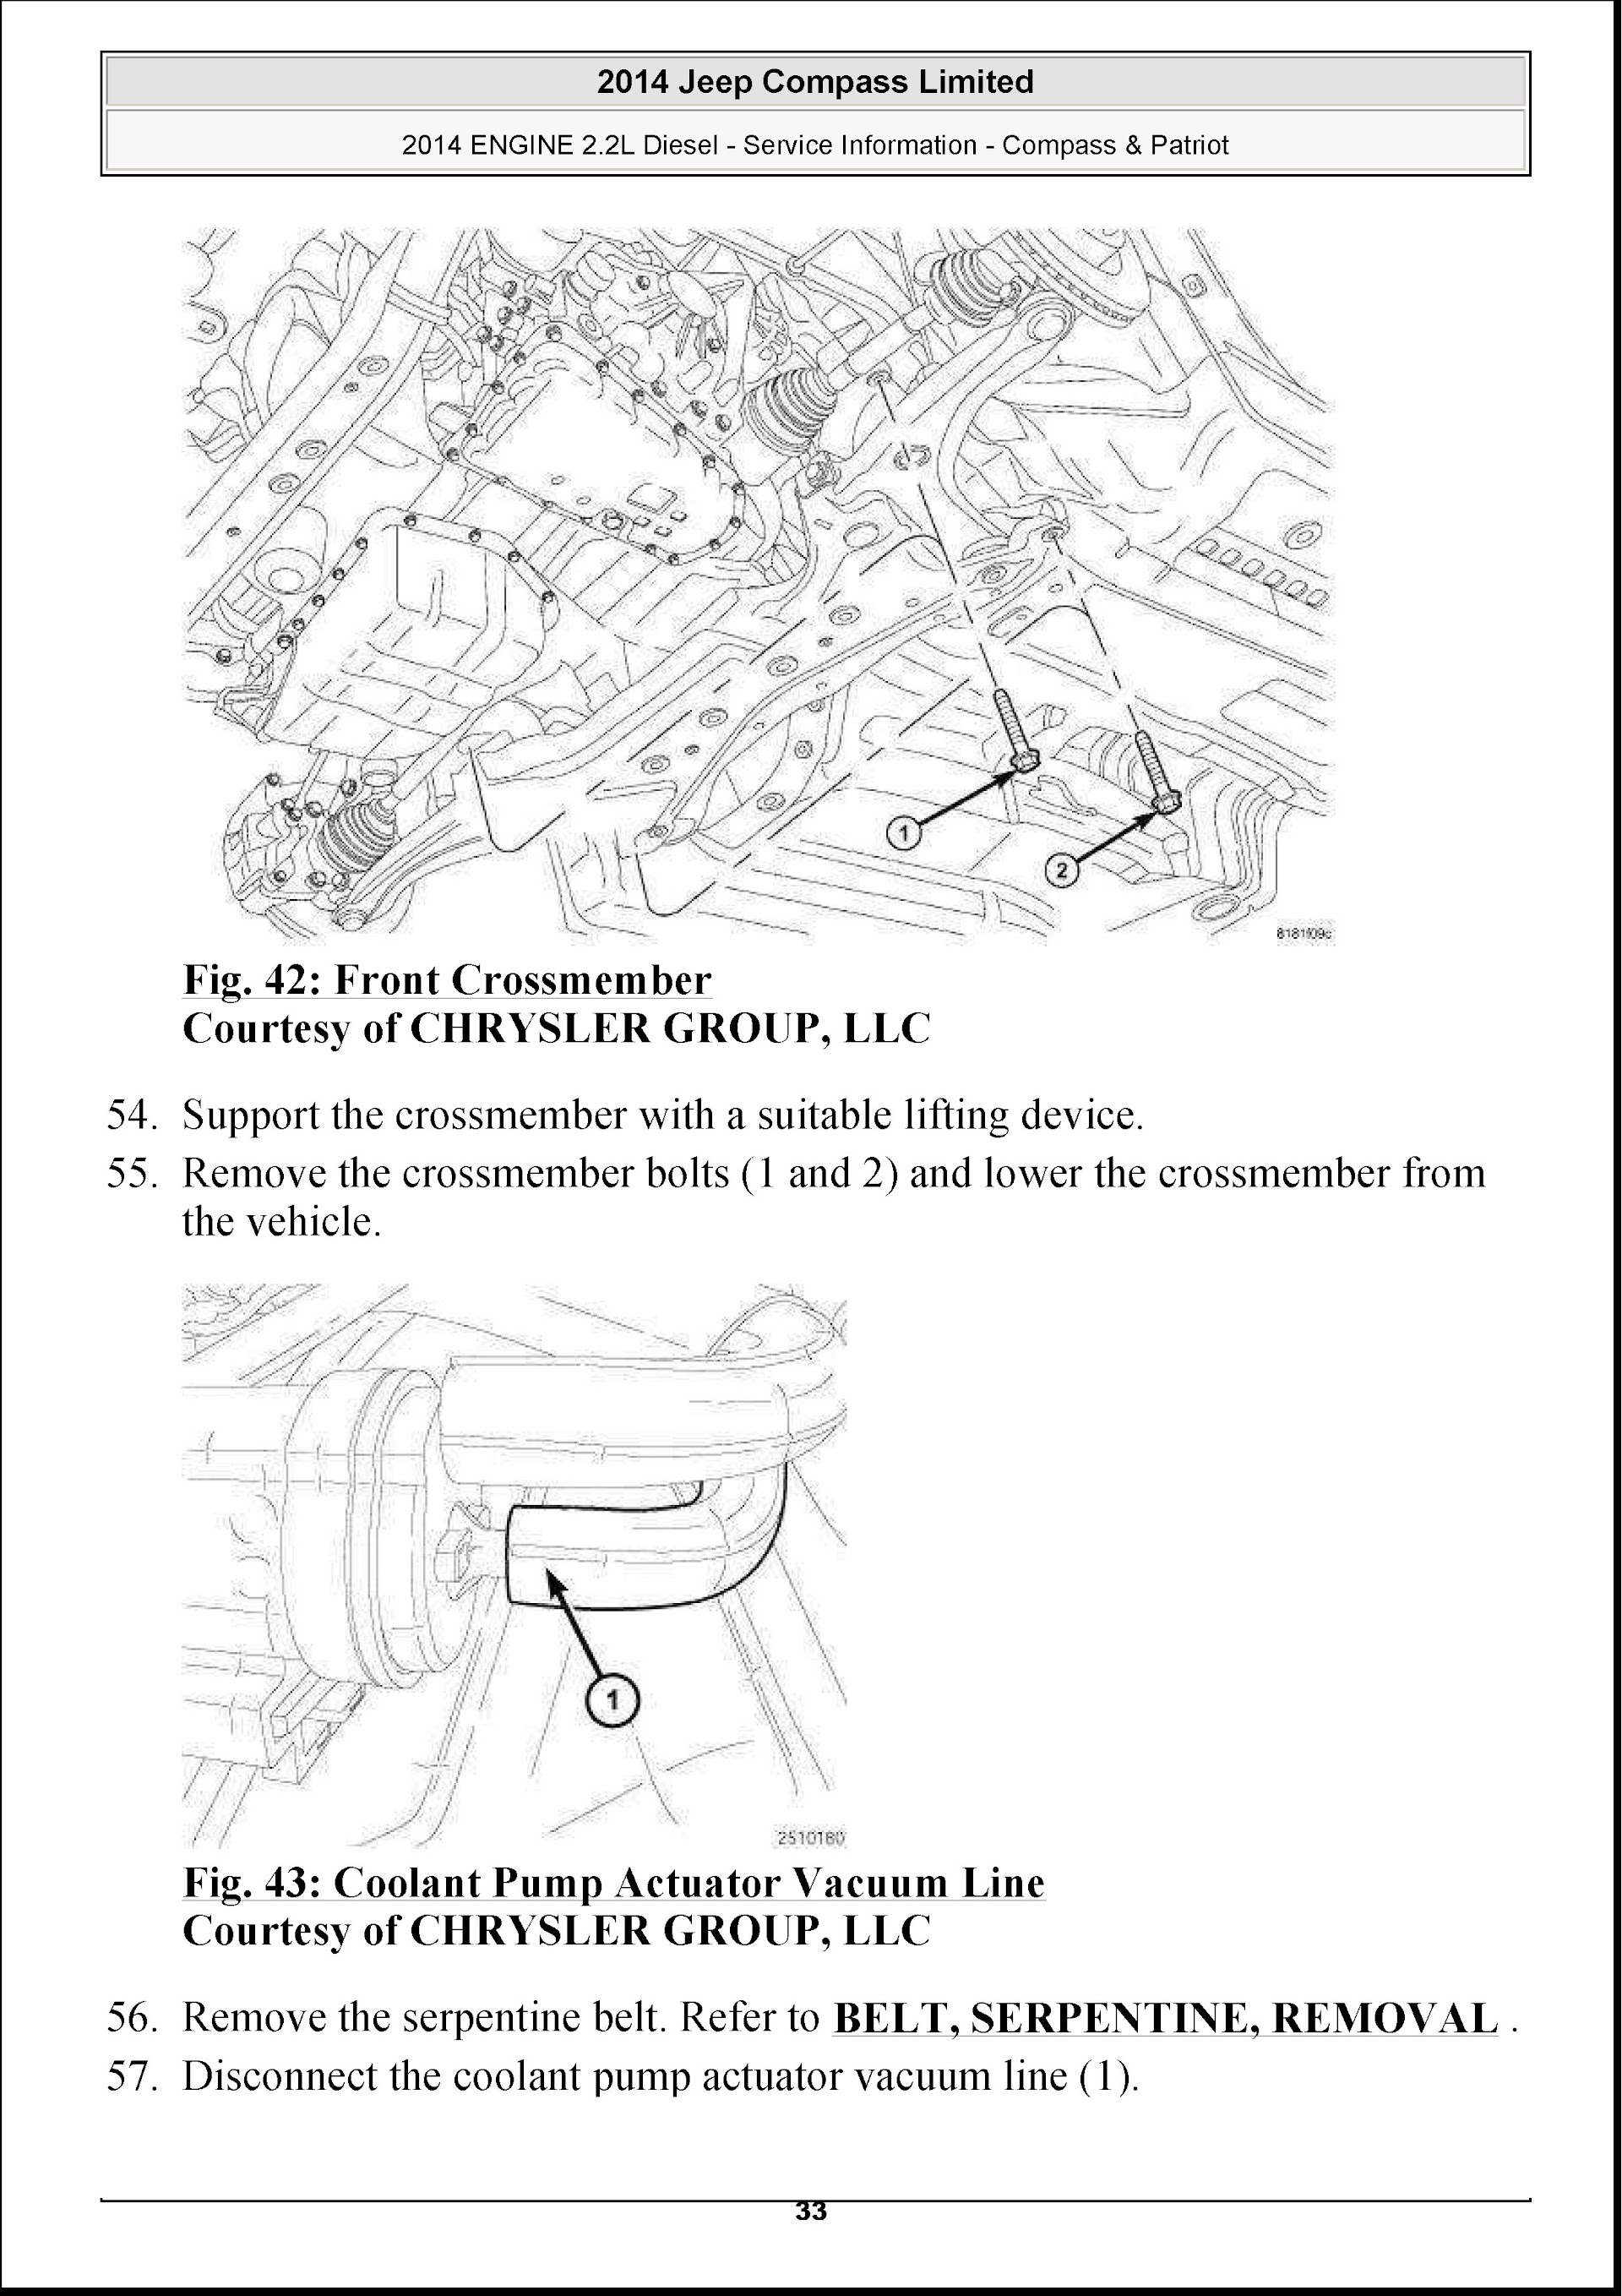 2014-2016 Jeep Compass and Patriot Repair Manual, Engine 2.2L Diesel, Service Information